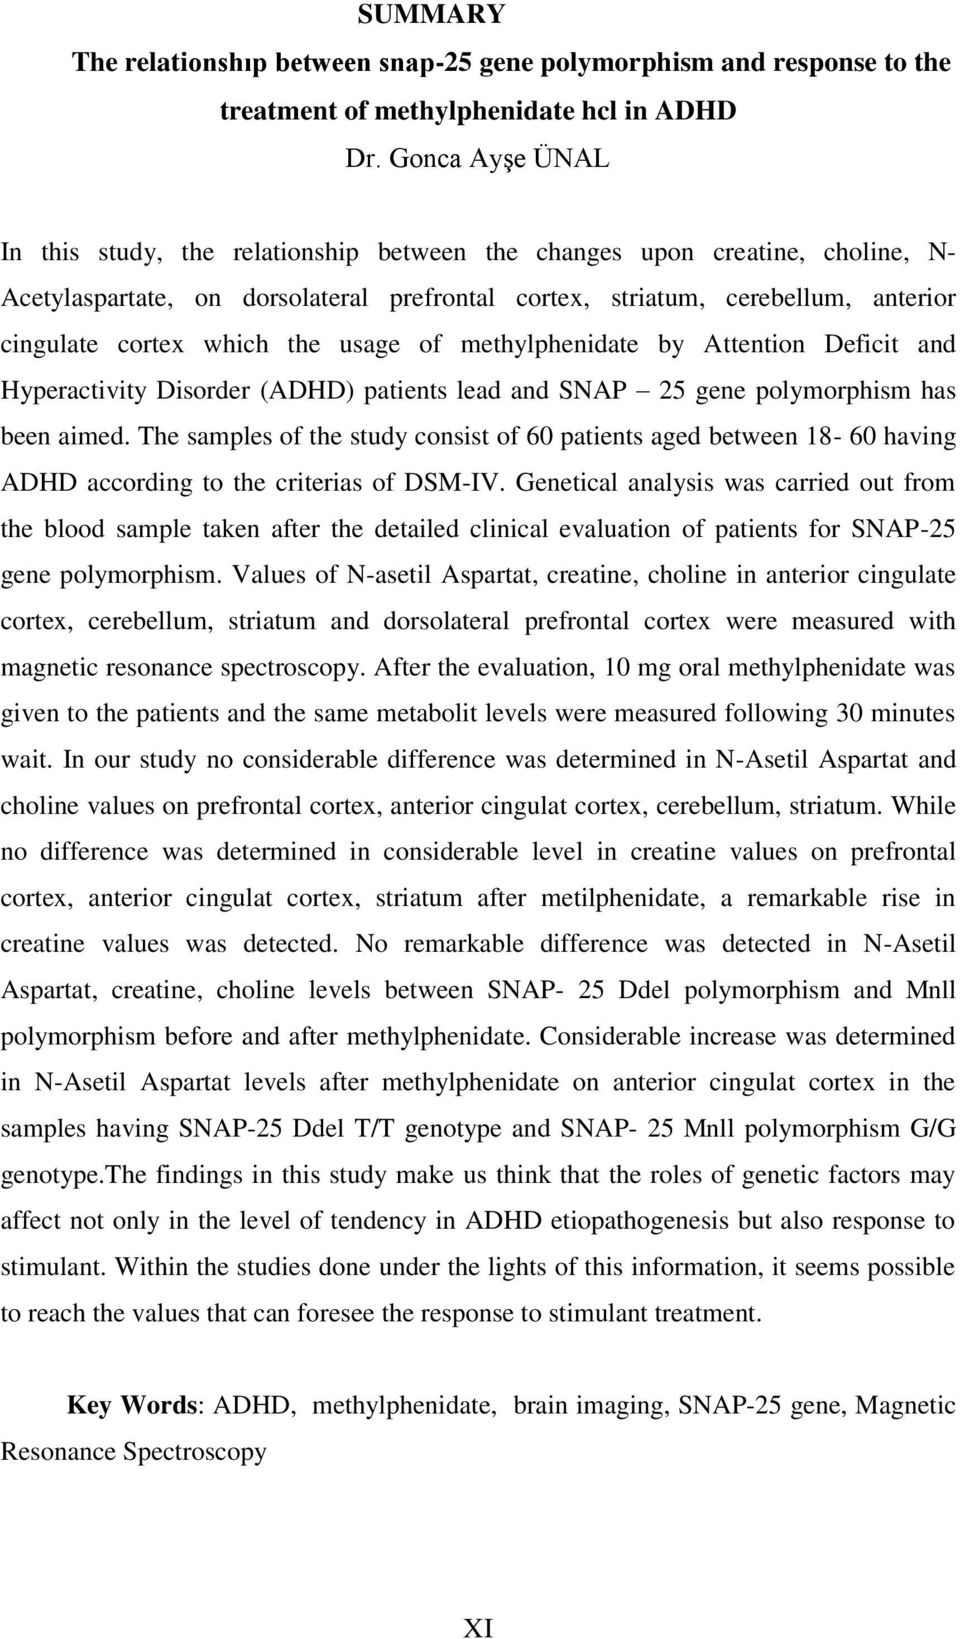 which the usage of methylphenidate by Attention Deficit and Hyperactivity Disorder (ADHD) patients lead and SNAP 25 gene polymorphism has been aimed.